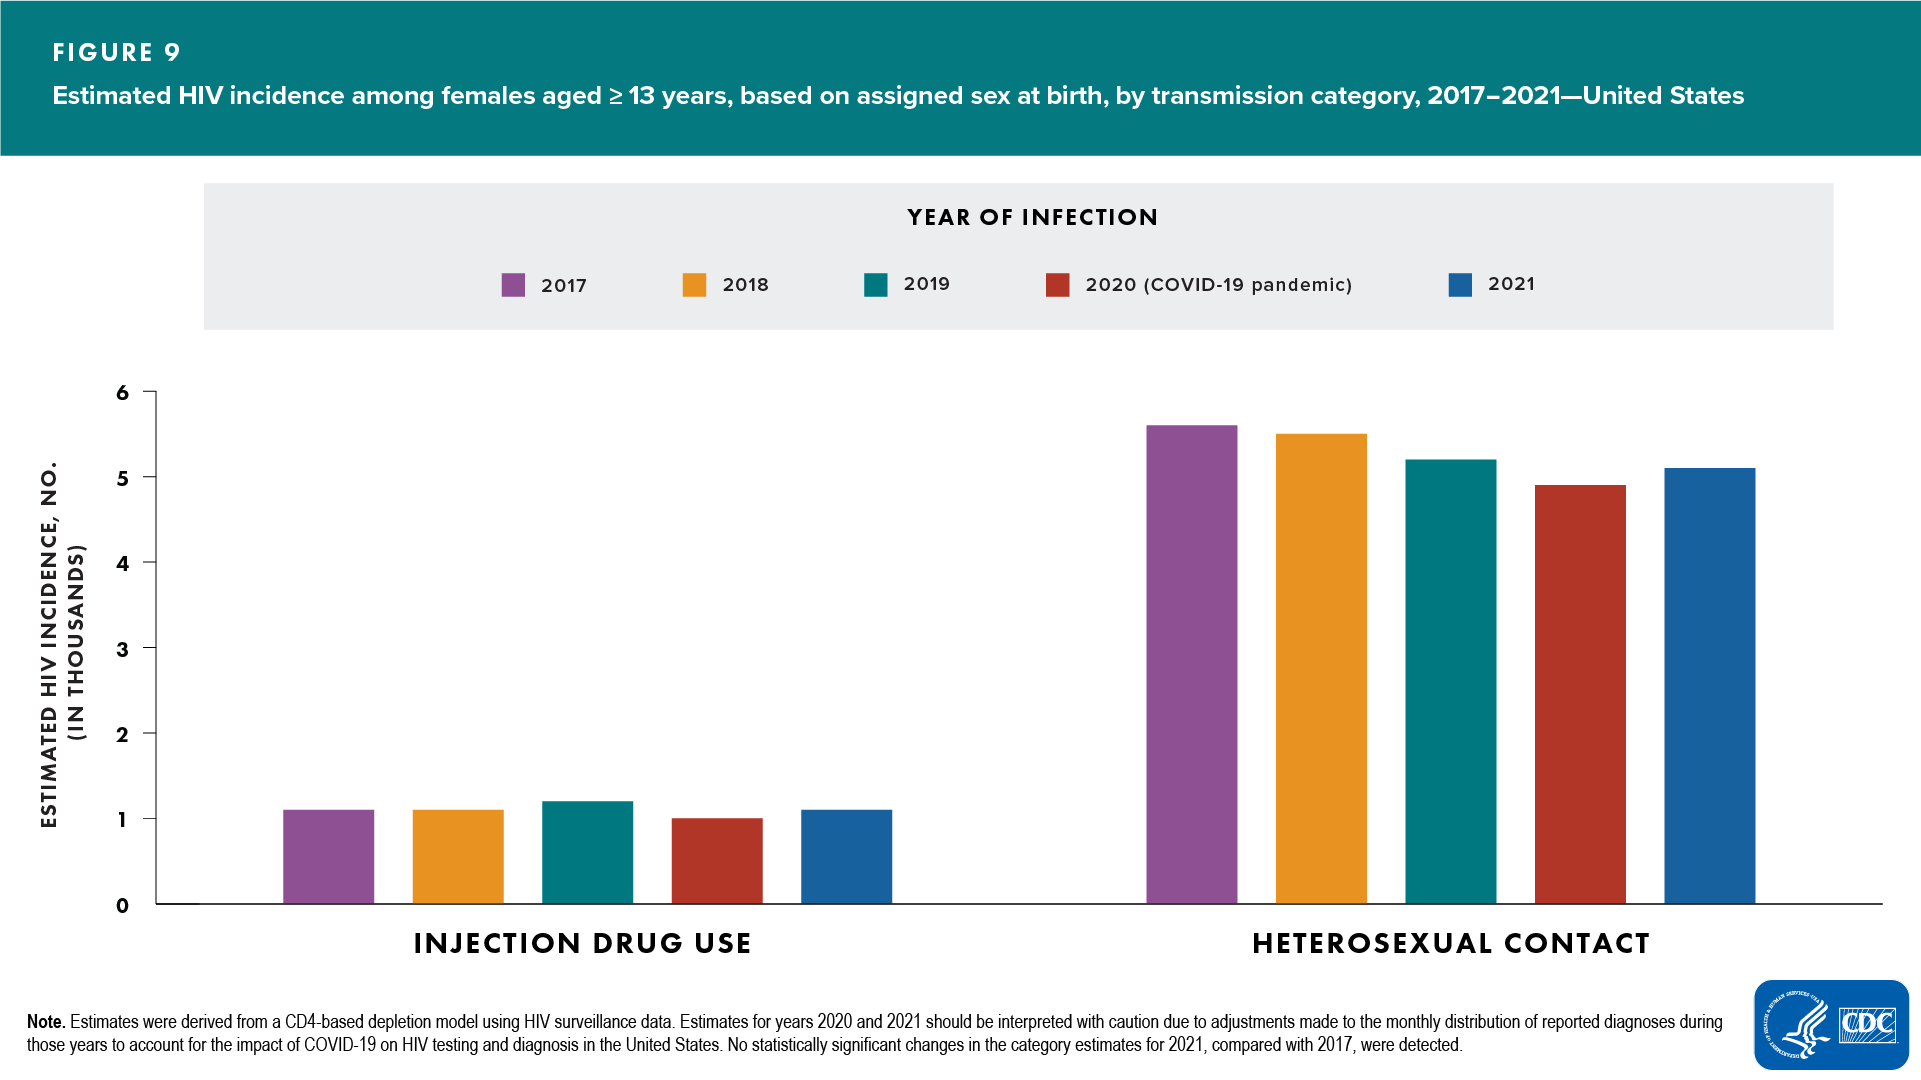 Figure 9. Estimated HIV incidence among females aged ≥13 years, based on assigned sex at birth, by transmission category, 2017–2021—United States